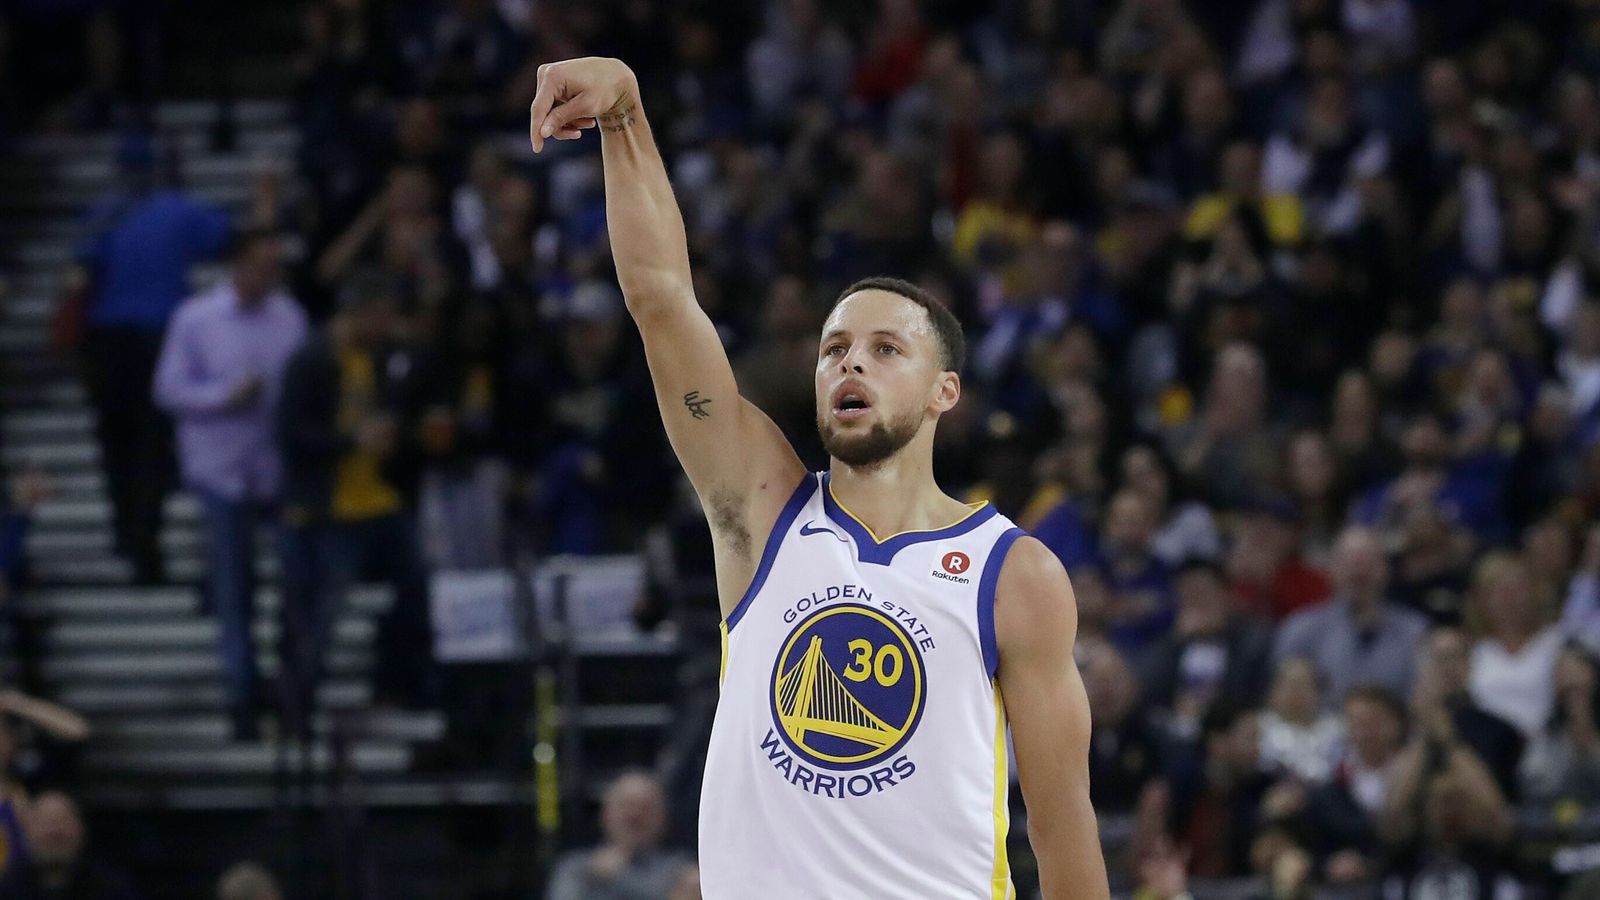 NBA All-Star Game 2022: Twitter reactions to Stephen Curry's red